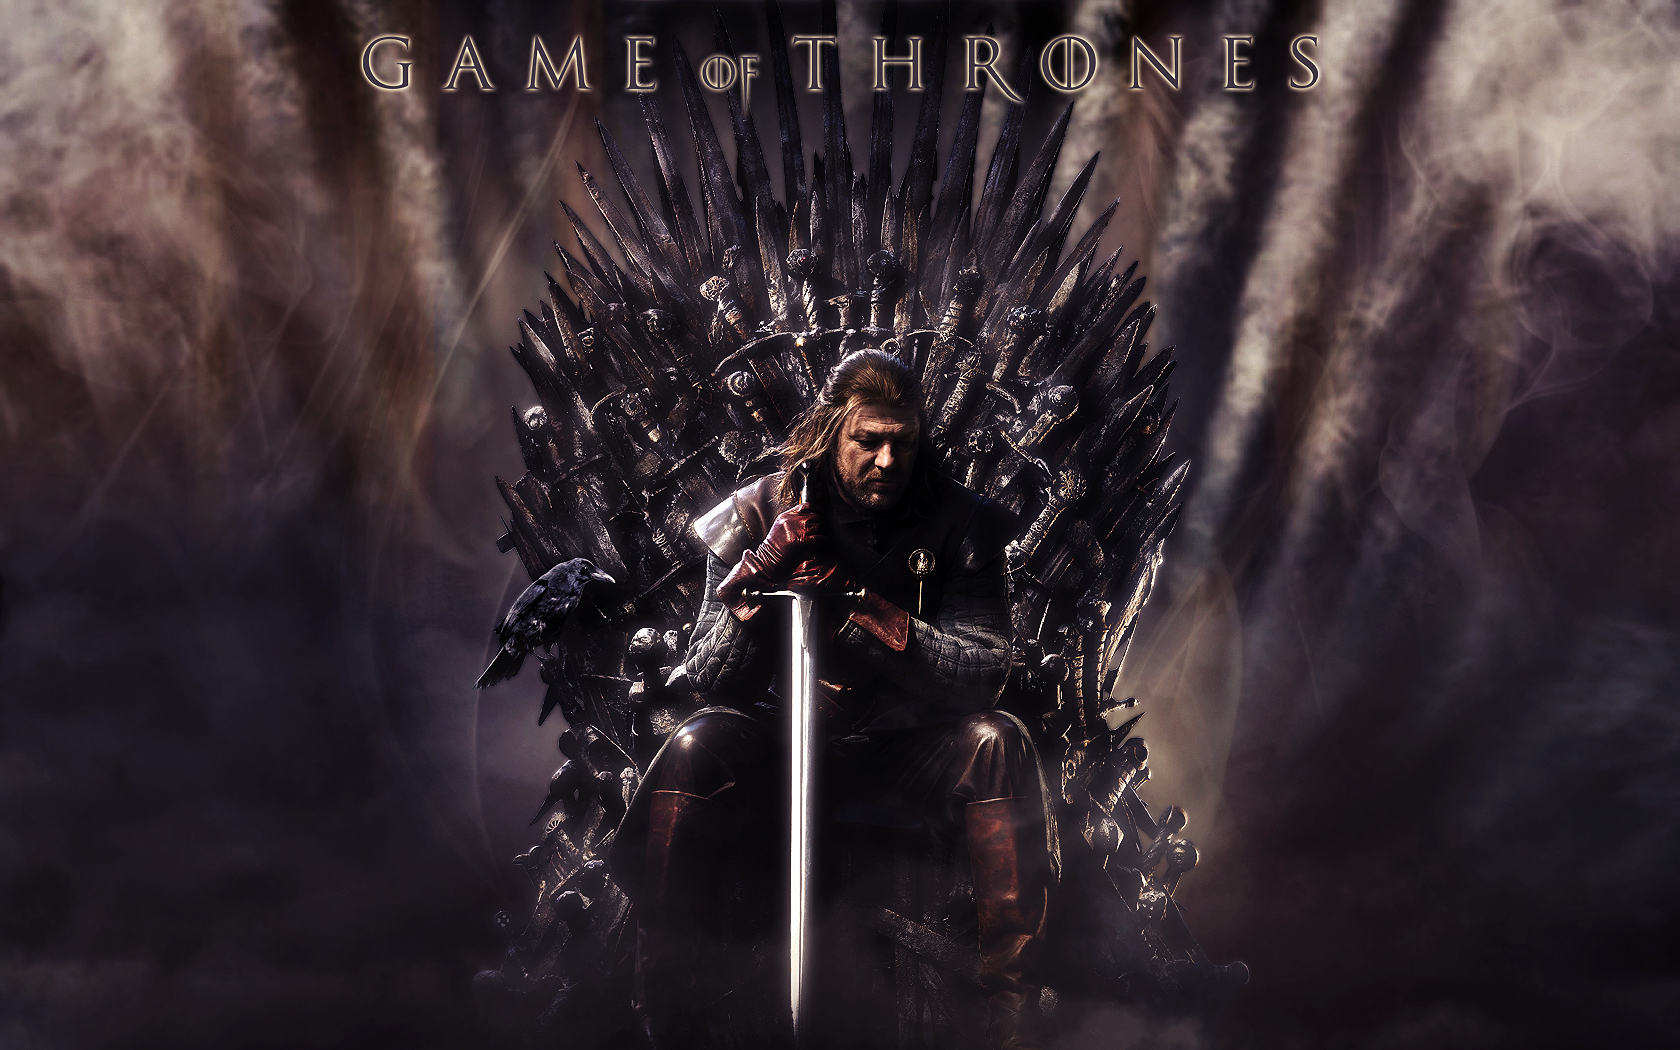 Game of Thrones Wallpaper by En Taiho on